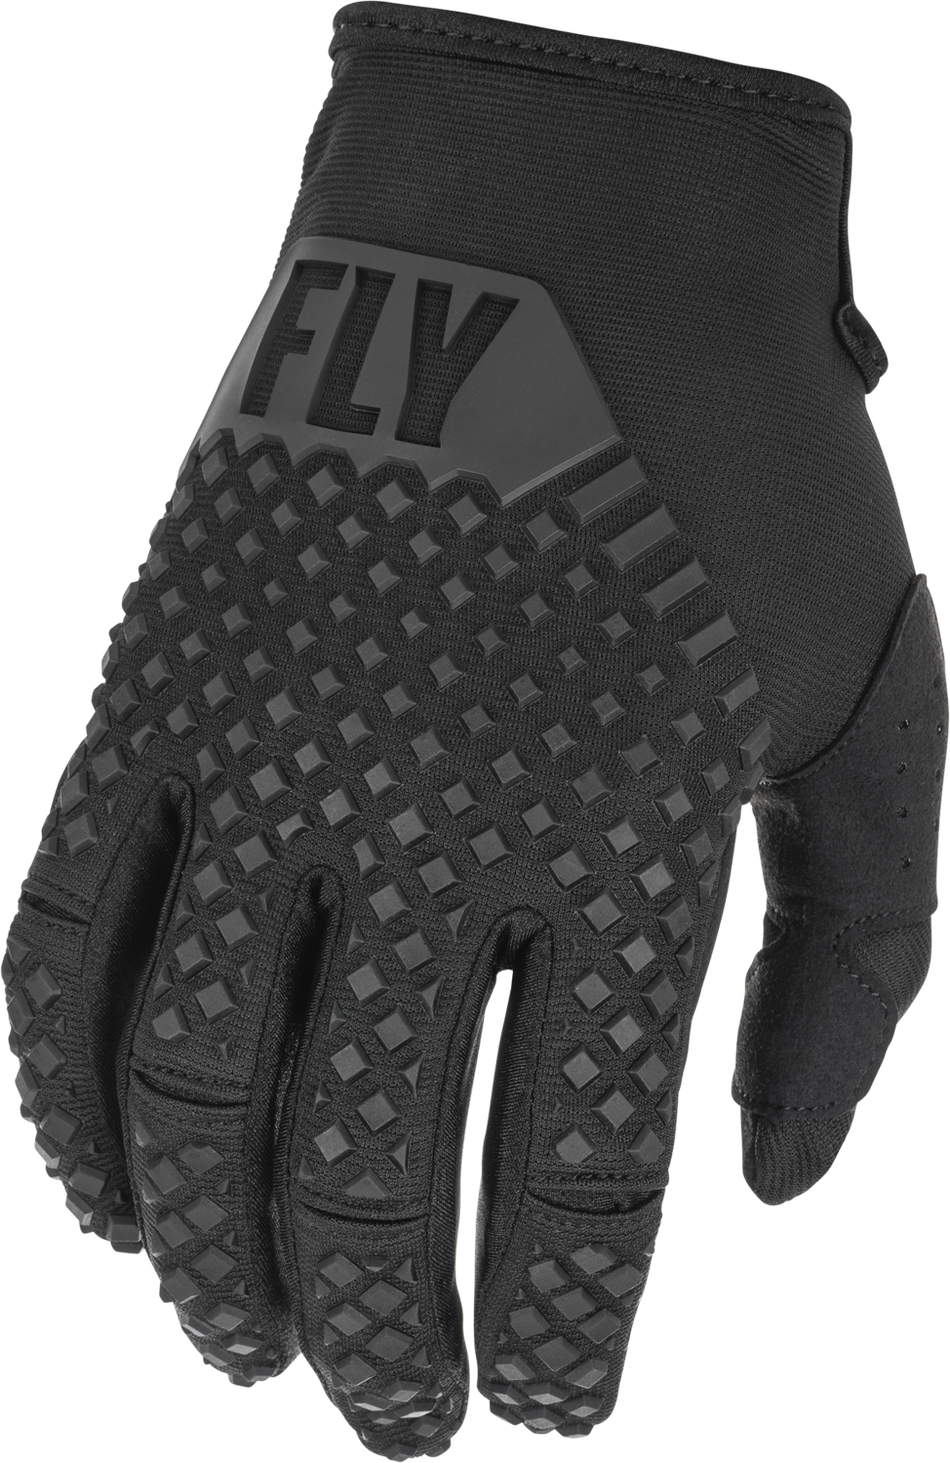 FLY RACING Kinetic Gloves Black Sm 375-410S